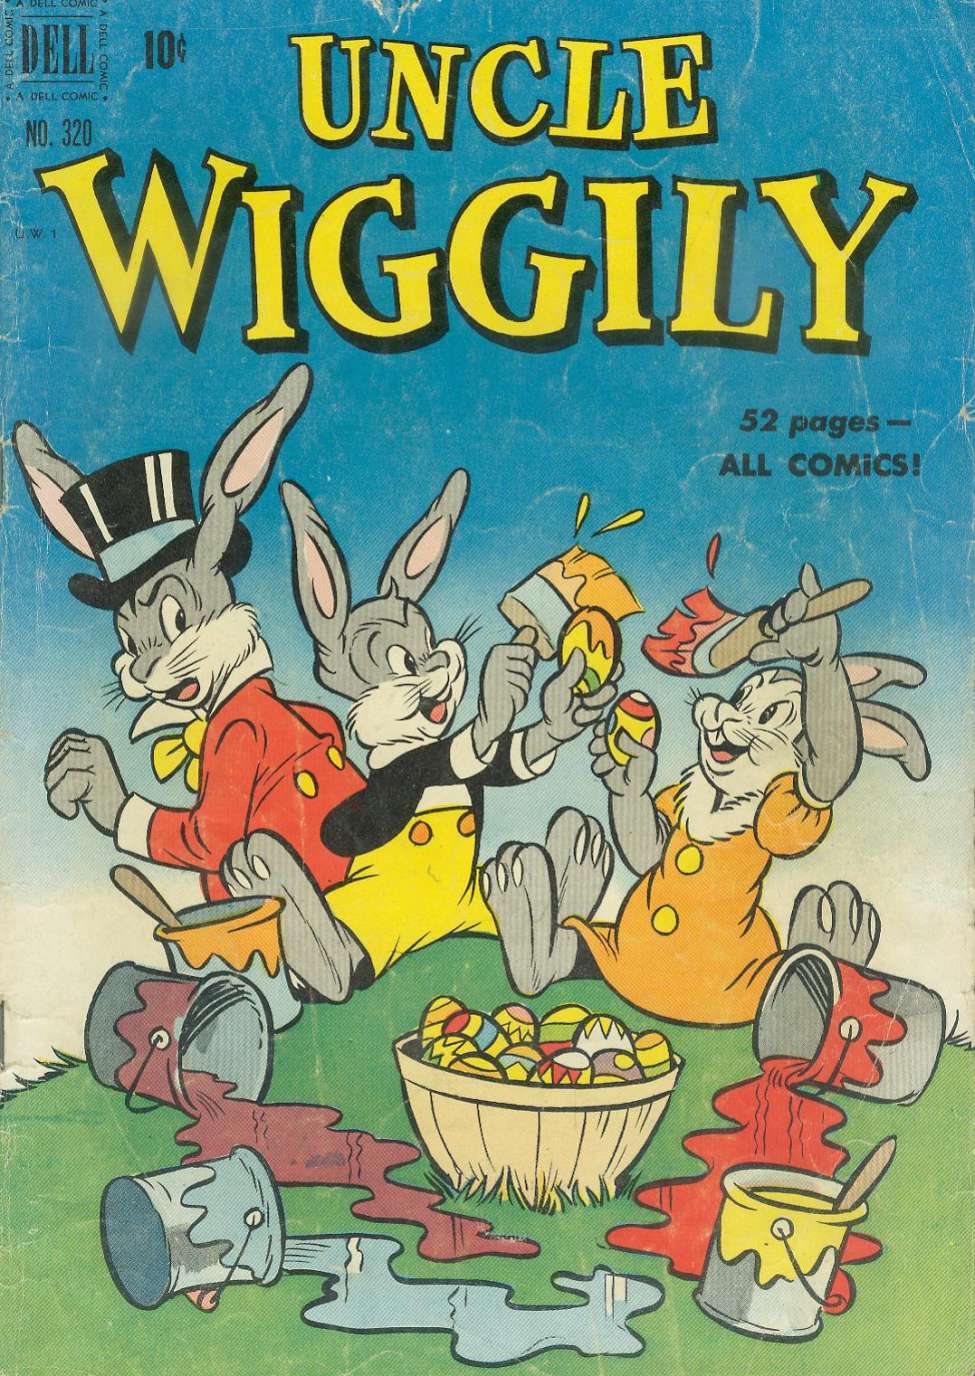 Book Cover For 0320 - Uncle Wiggily